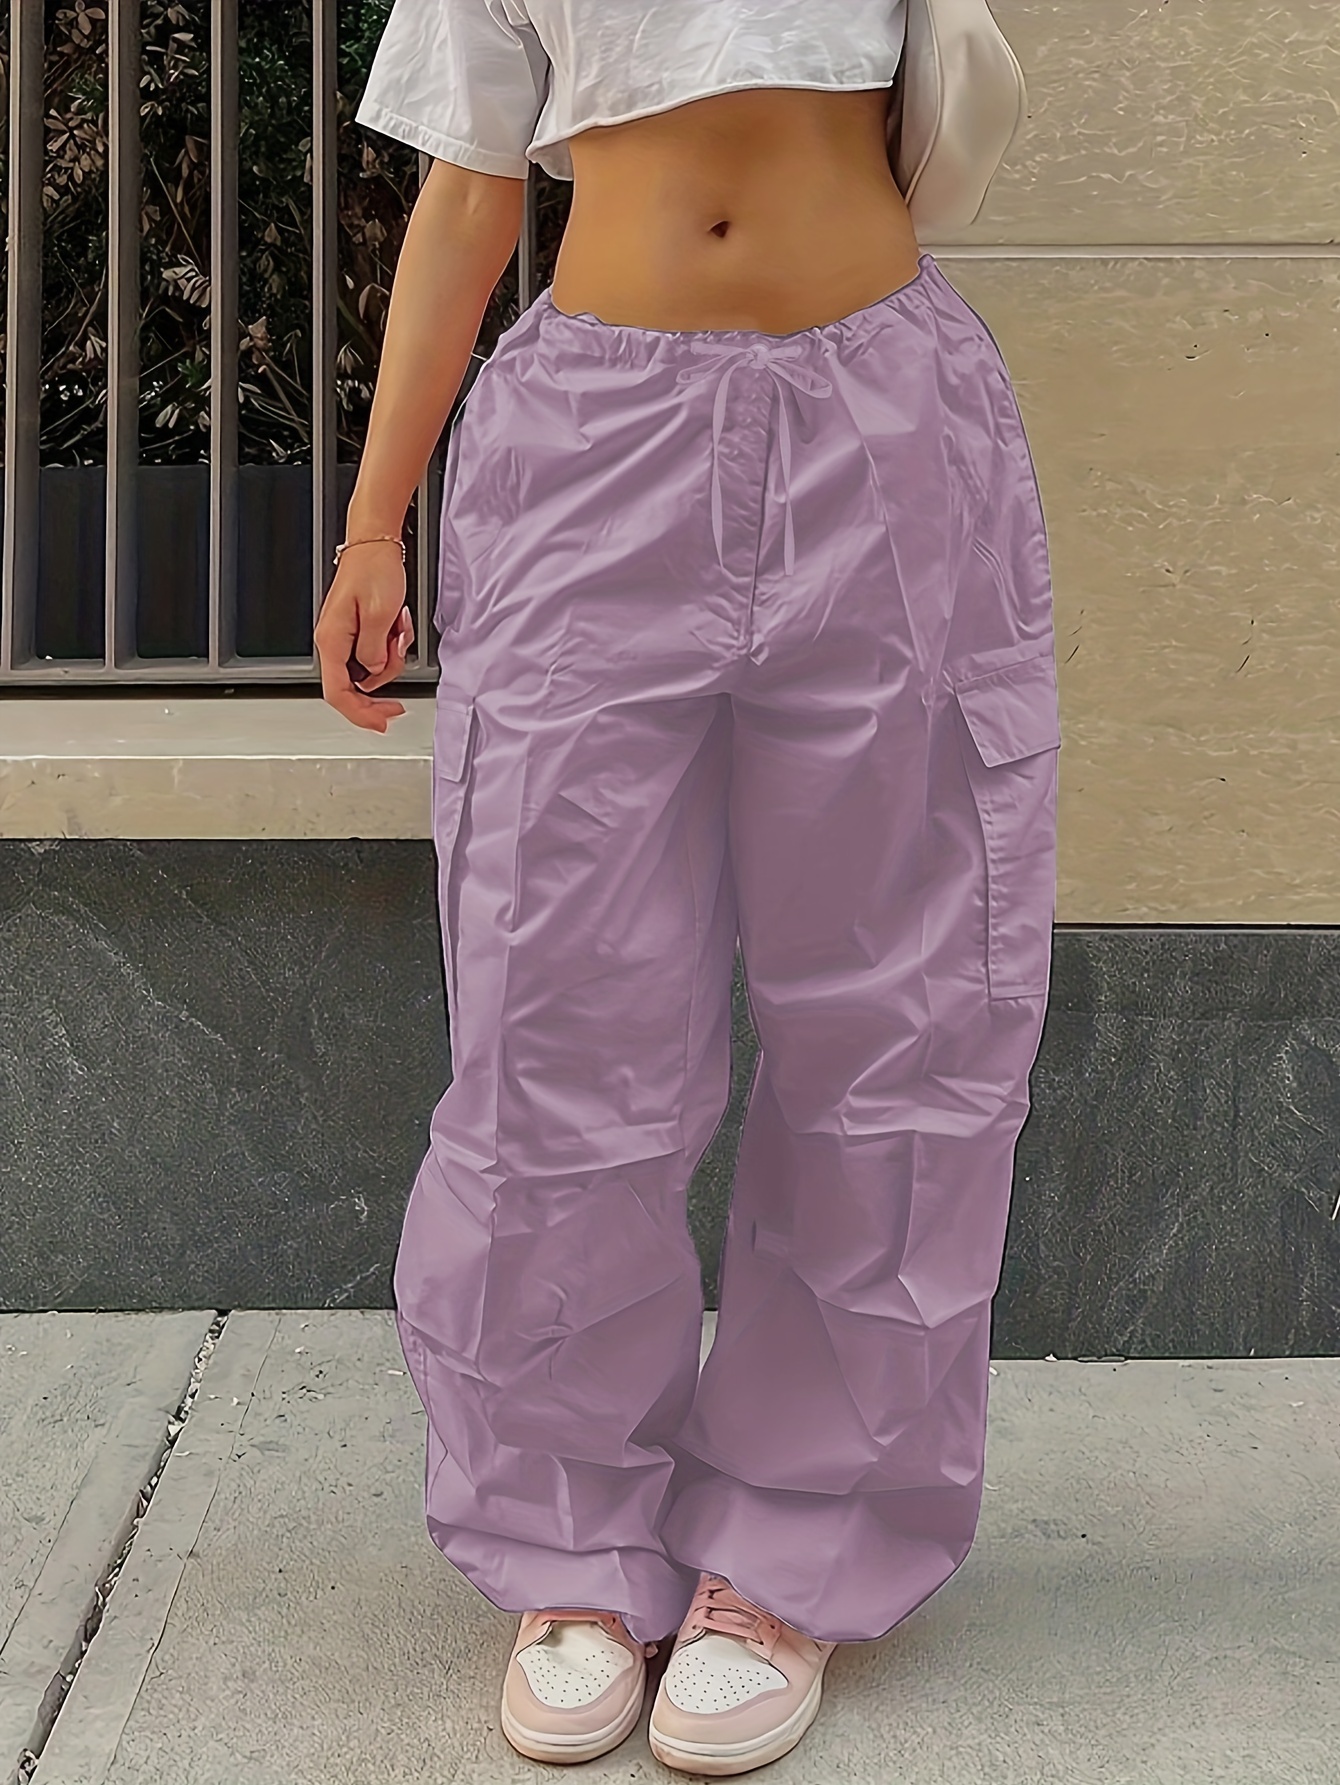 49.00]Zip Star Pockets Purple Cargo Pants Drawstring Cuffs  Purple cargo  pants, Drawstring pants, Really cute outfits